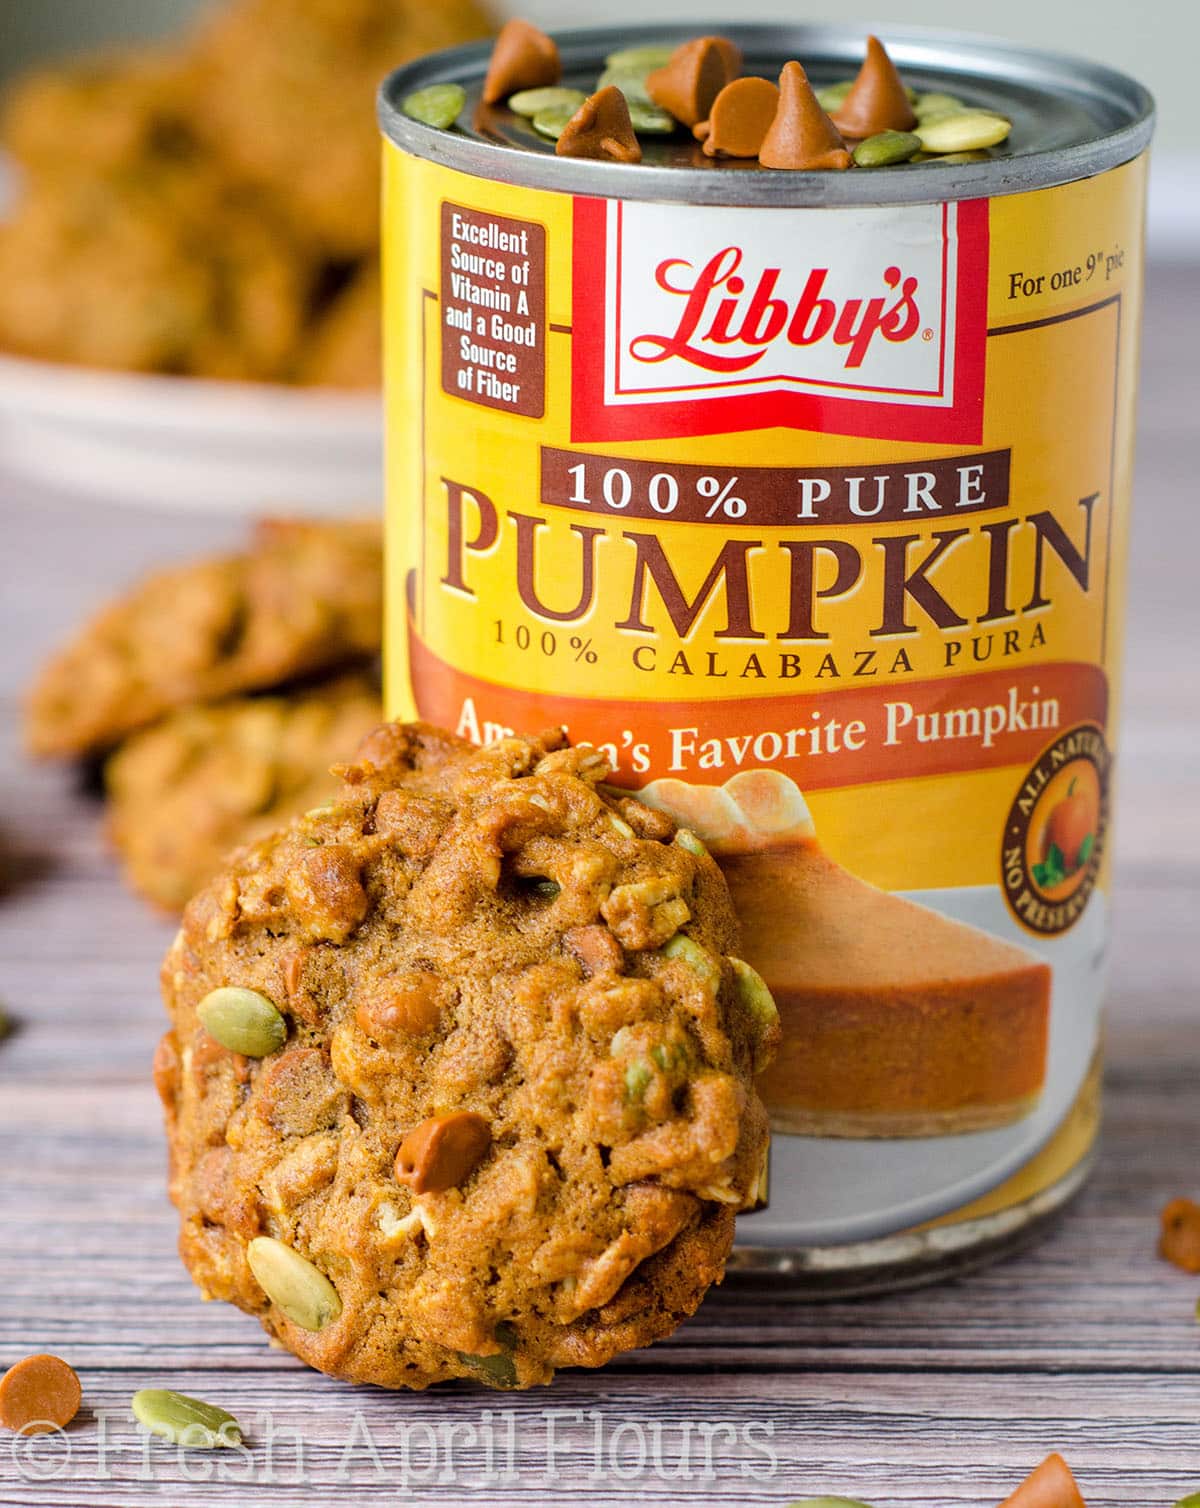 Pumpkin oatmeal cookie standing upright and resting on a can of pumpkin.